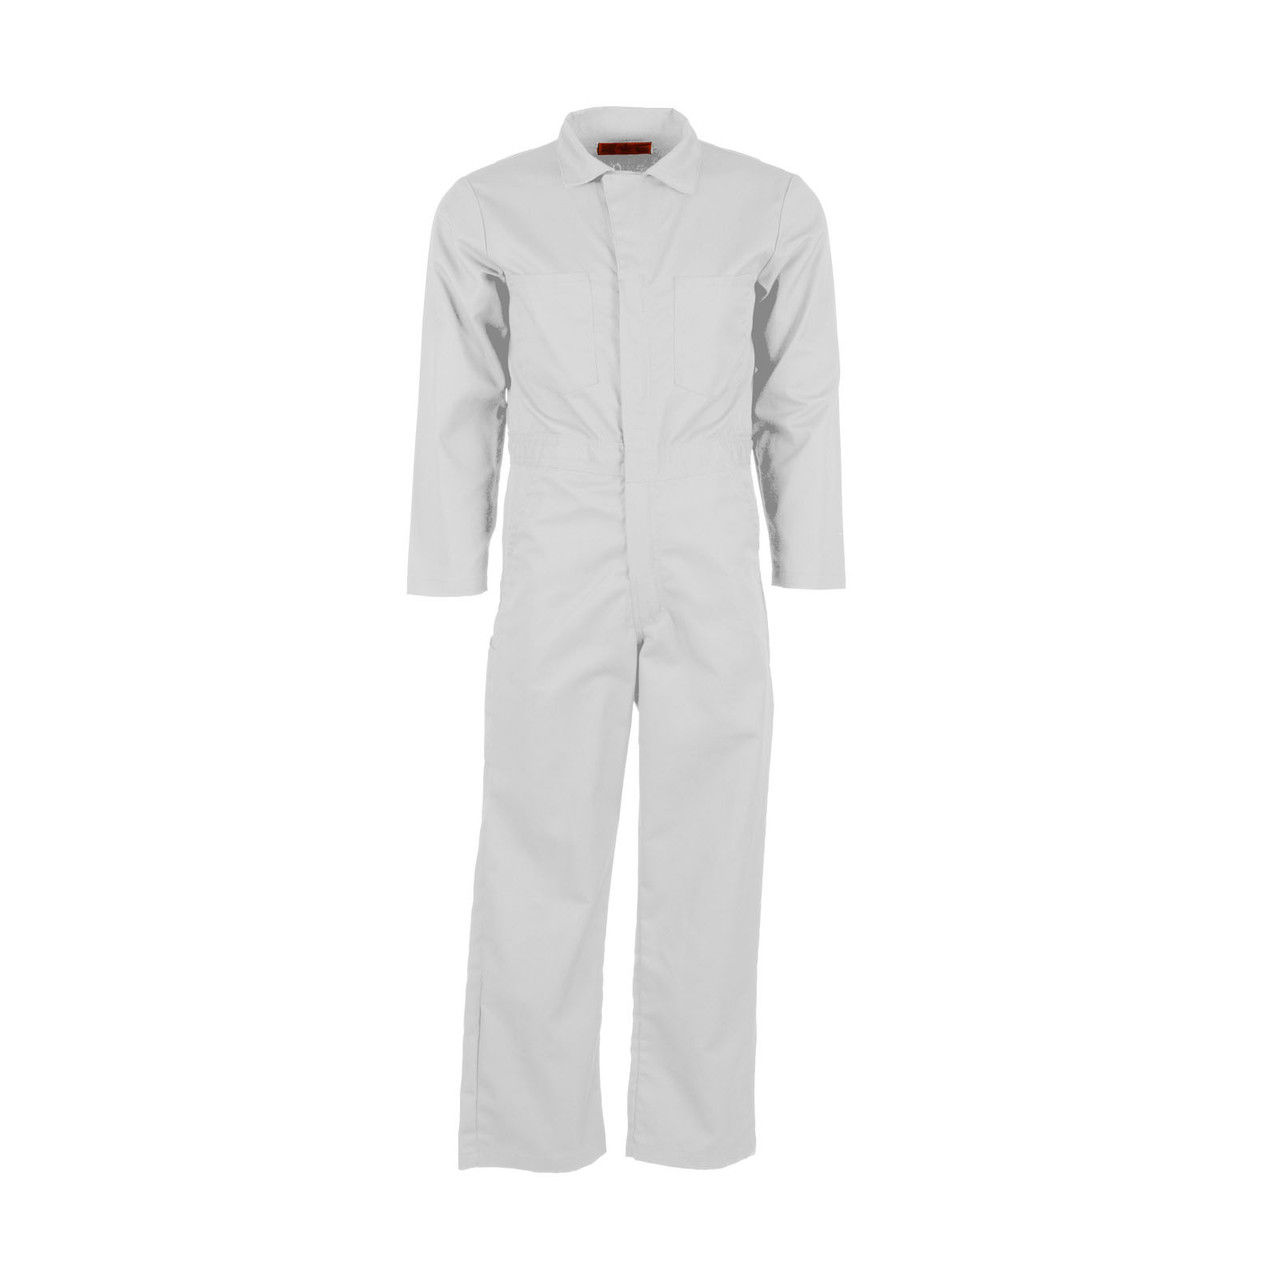 What is the waist size range of the white coveralls CV10WH?